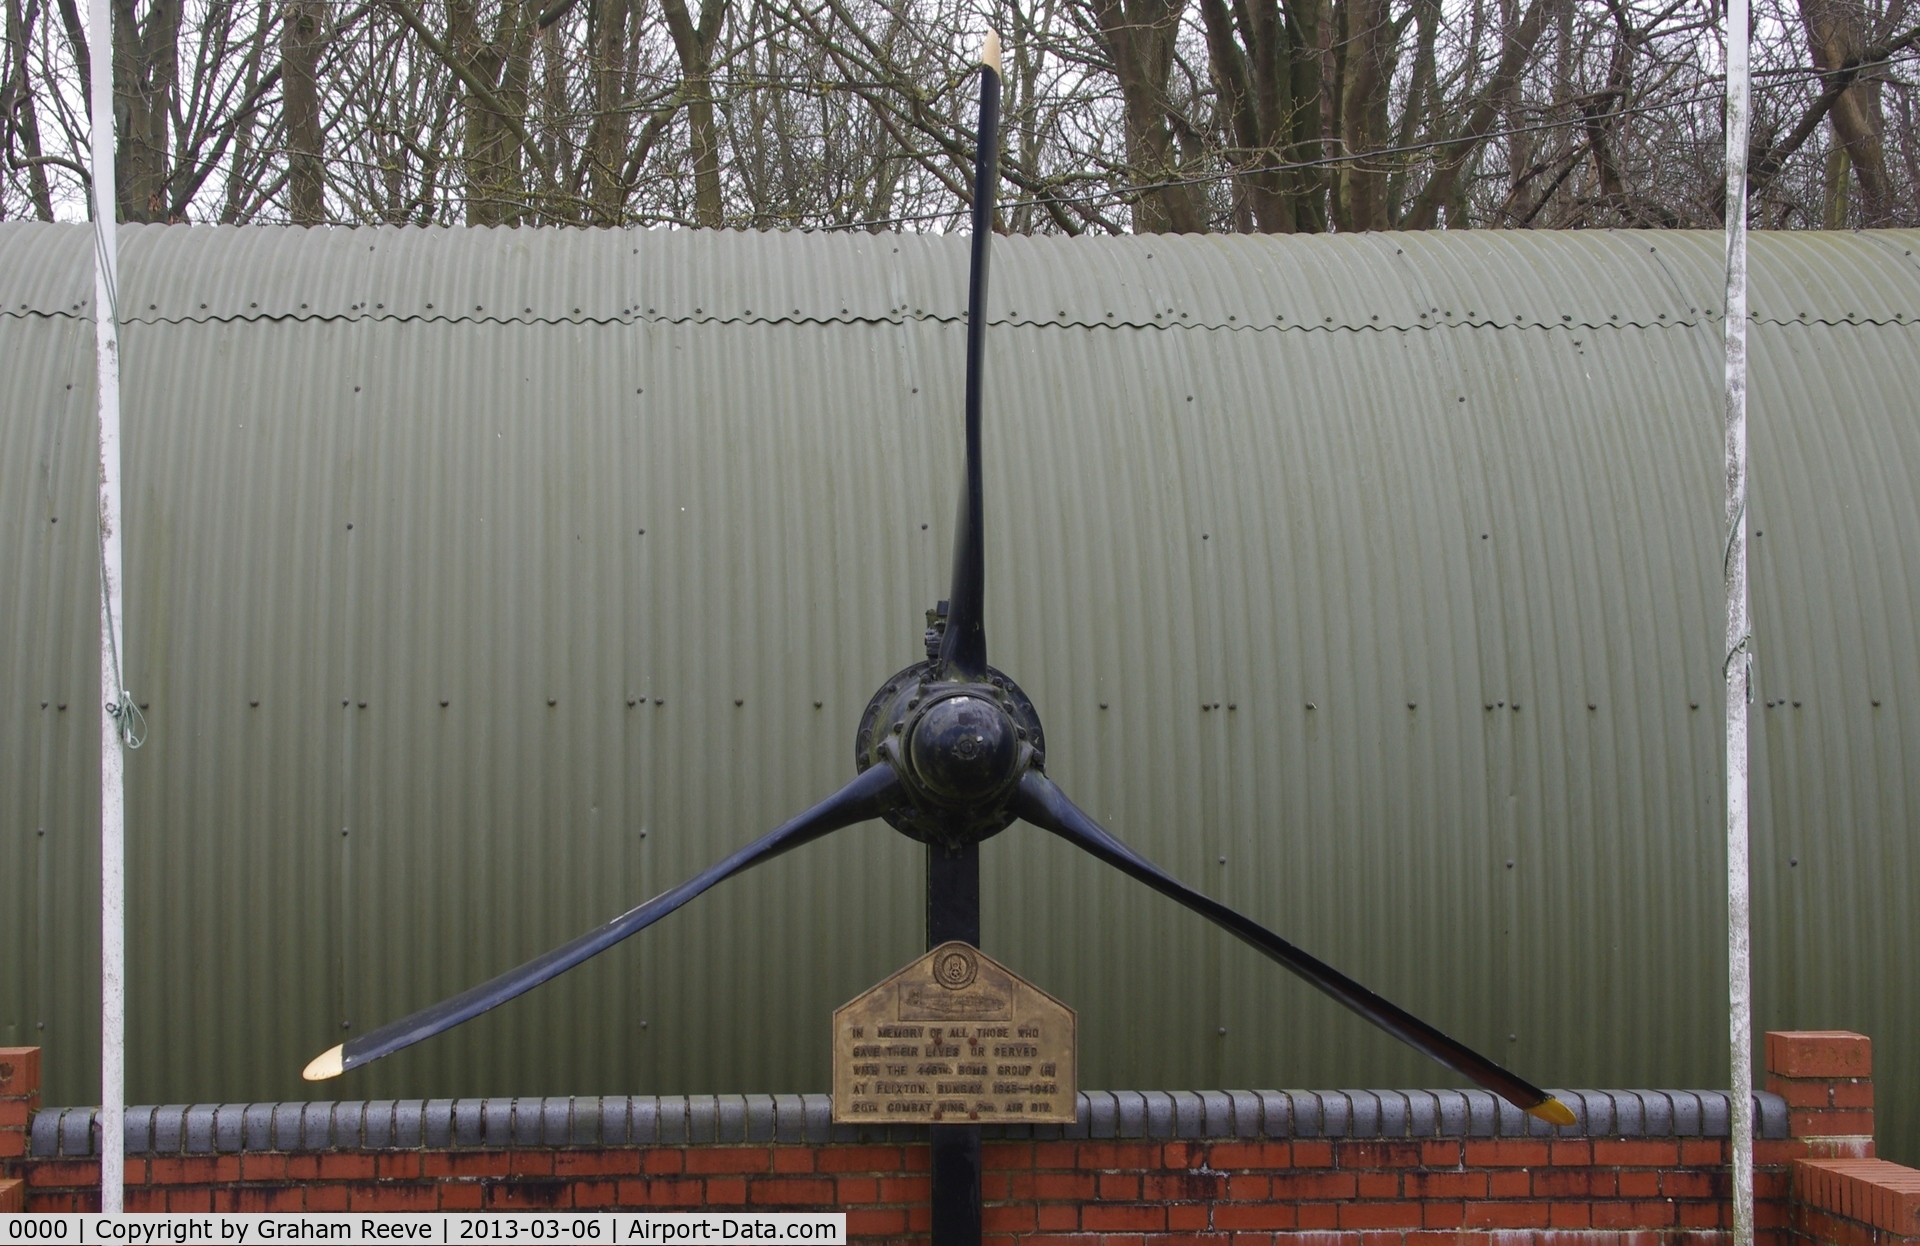 0000 Airport - Memorial for those who gave their lives in the 446th bomber at Flixton.